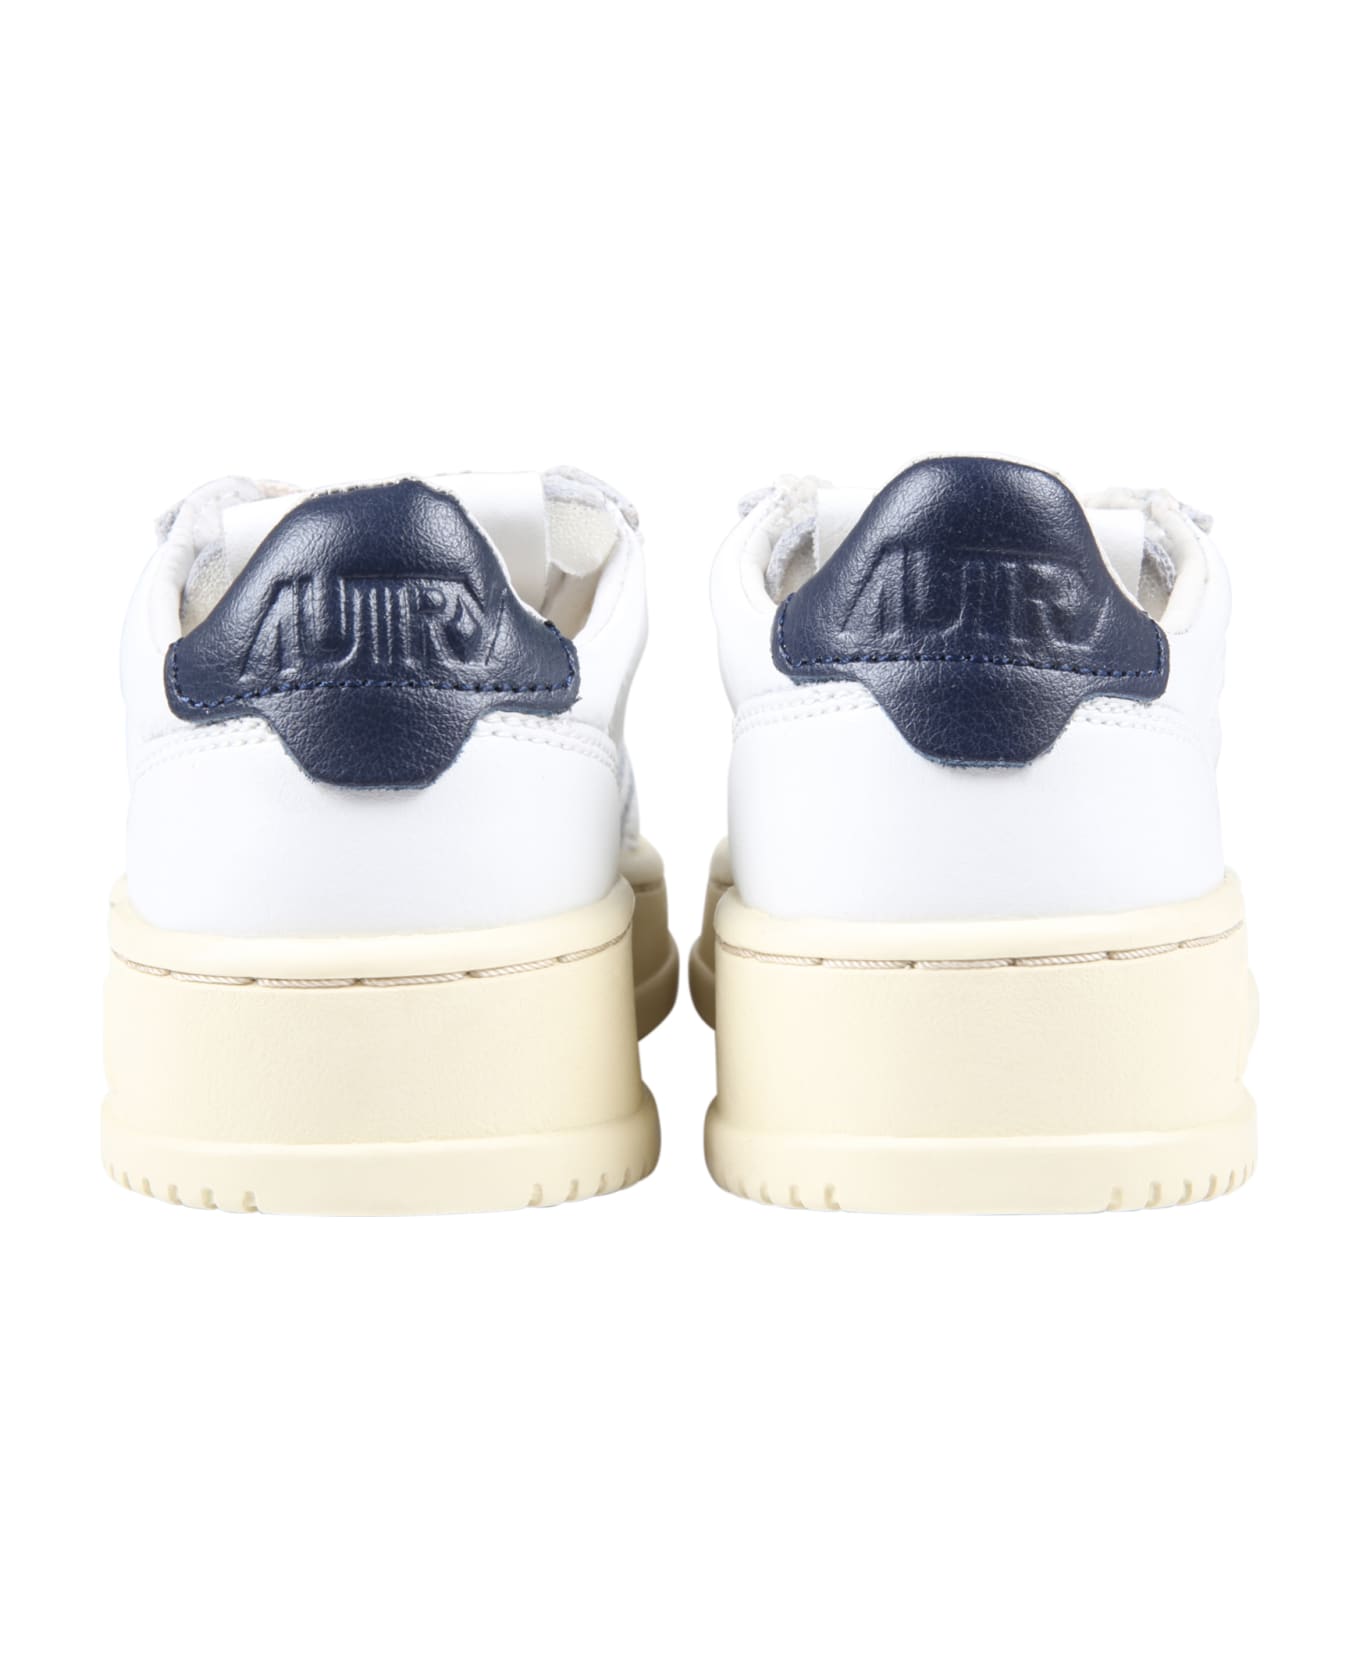 Autry White Sneakers For Kids With Blue Logo - White